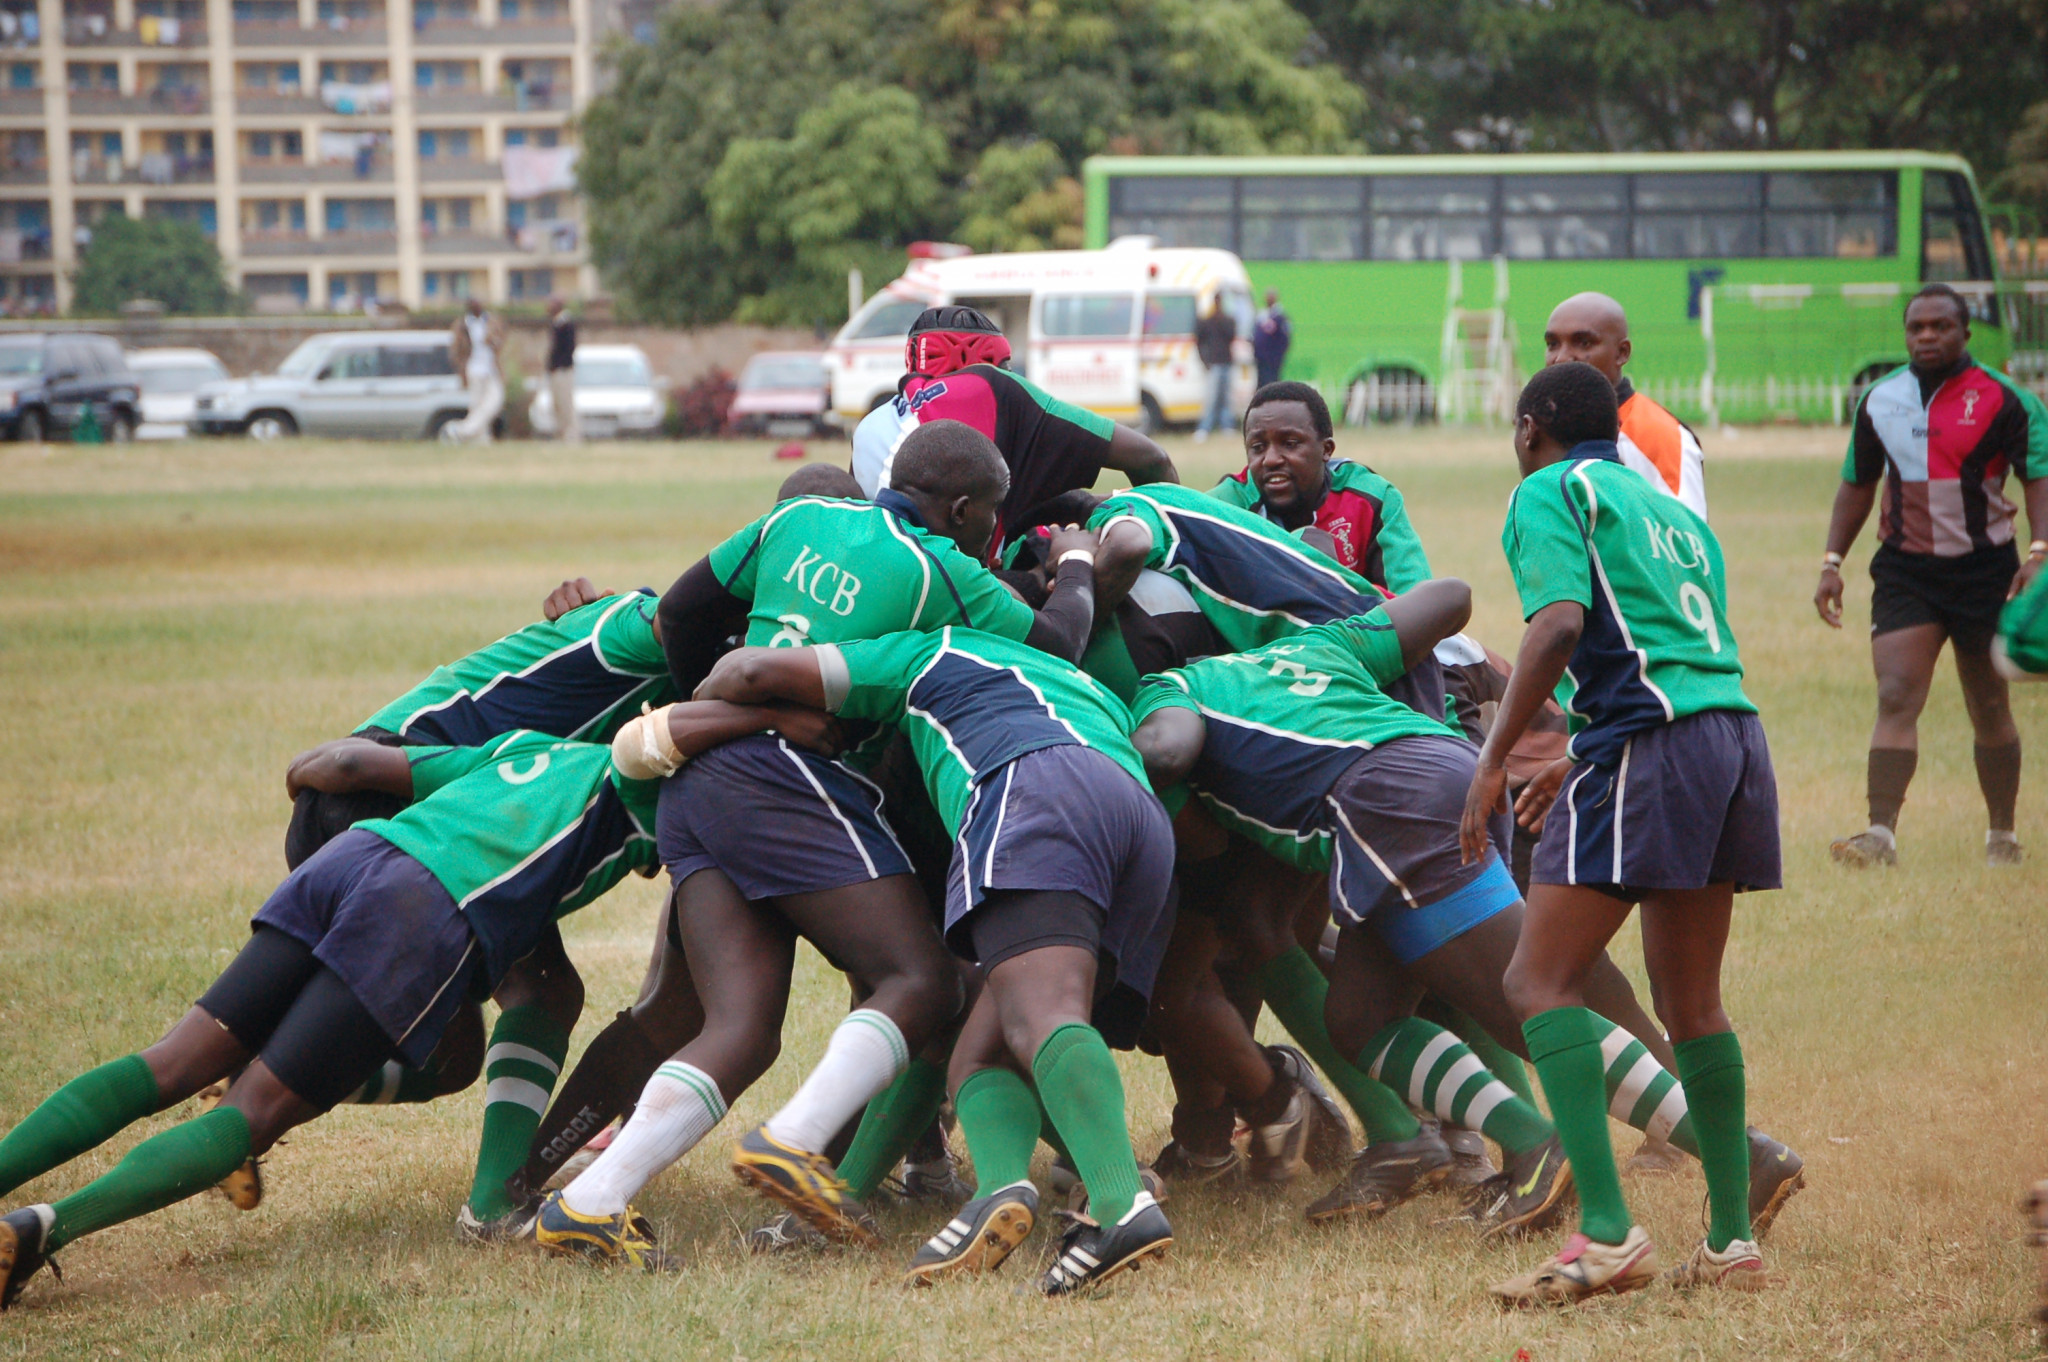 The remaining matches for competitions such as the Kenya Cup and KRU Championship have been cancelled ©Wikipedia